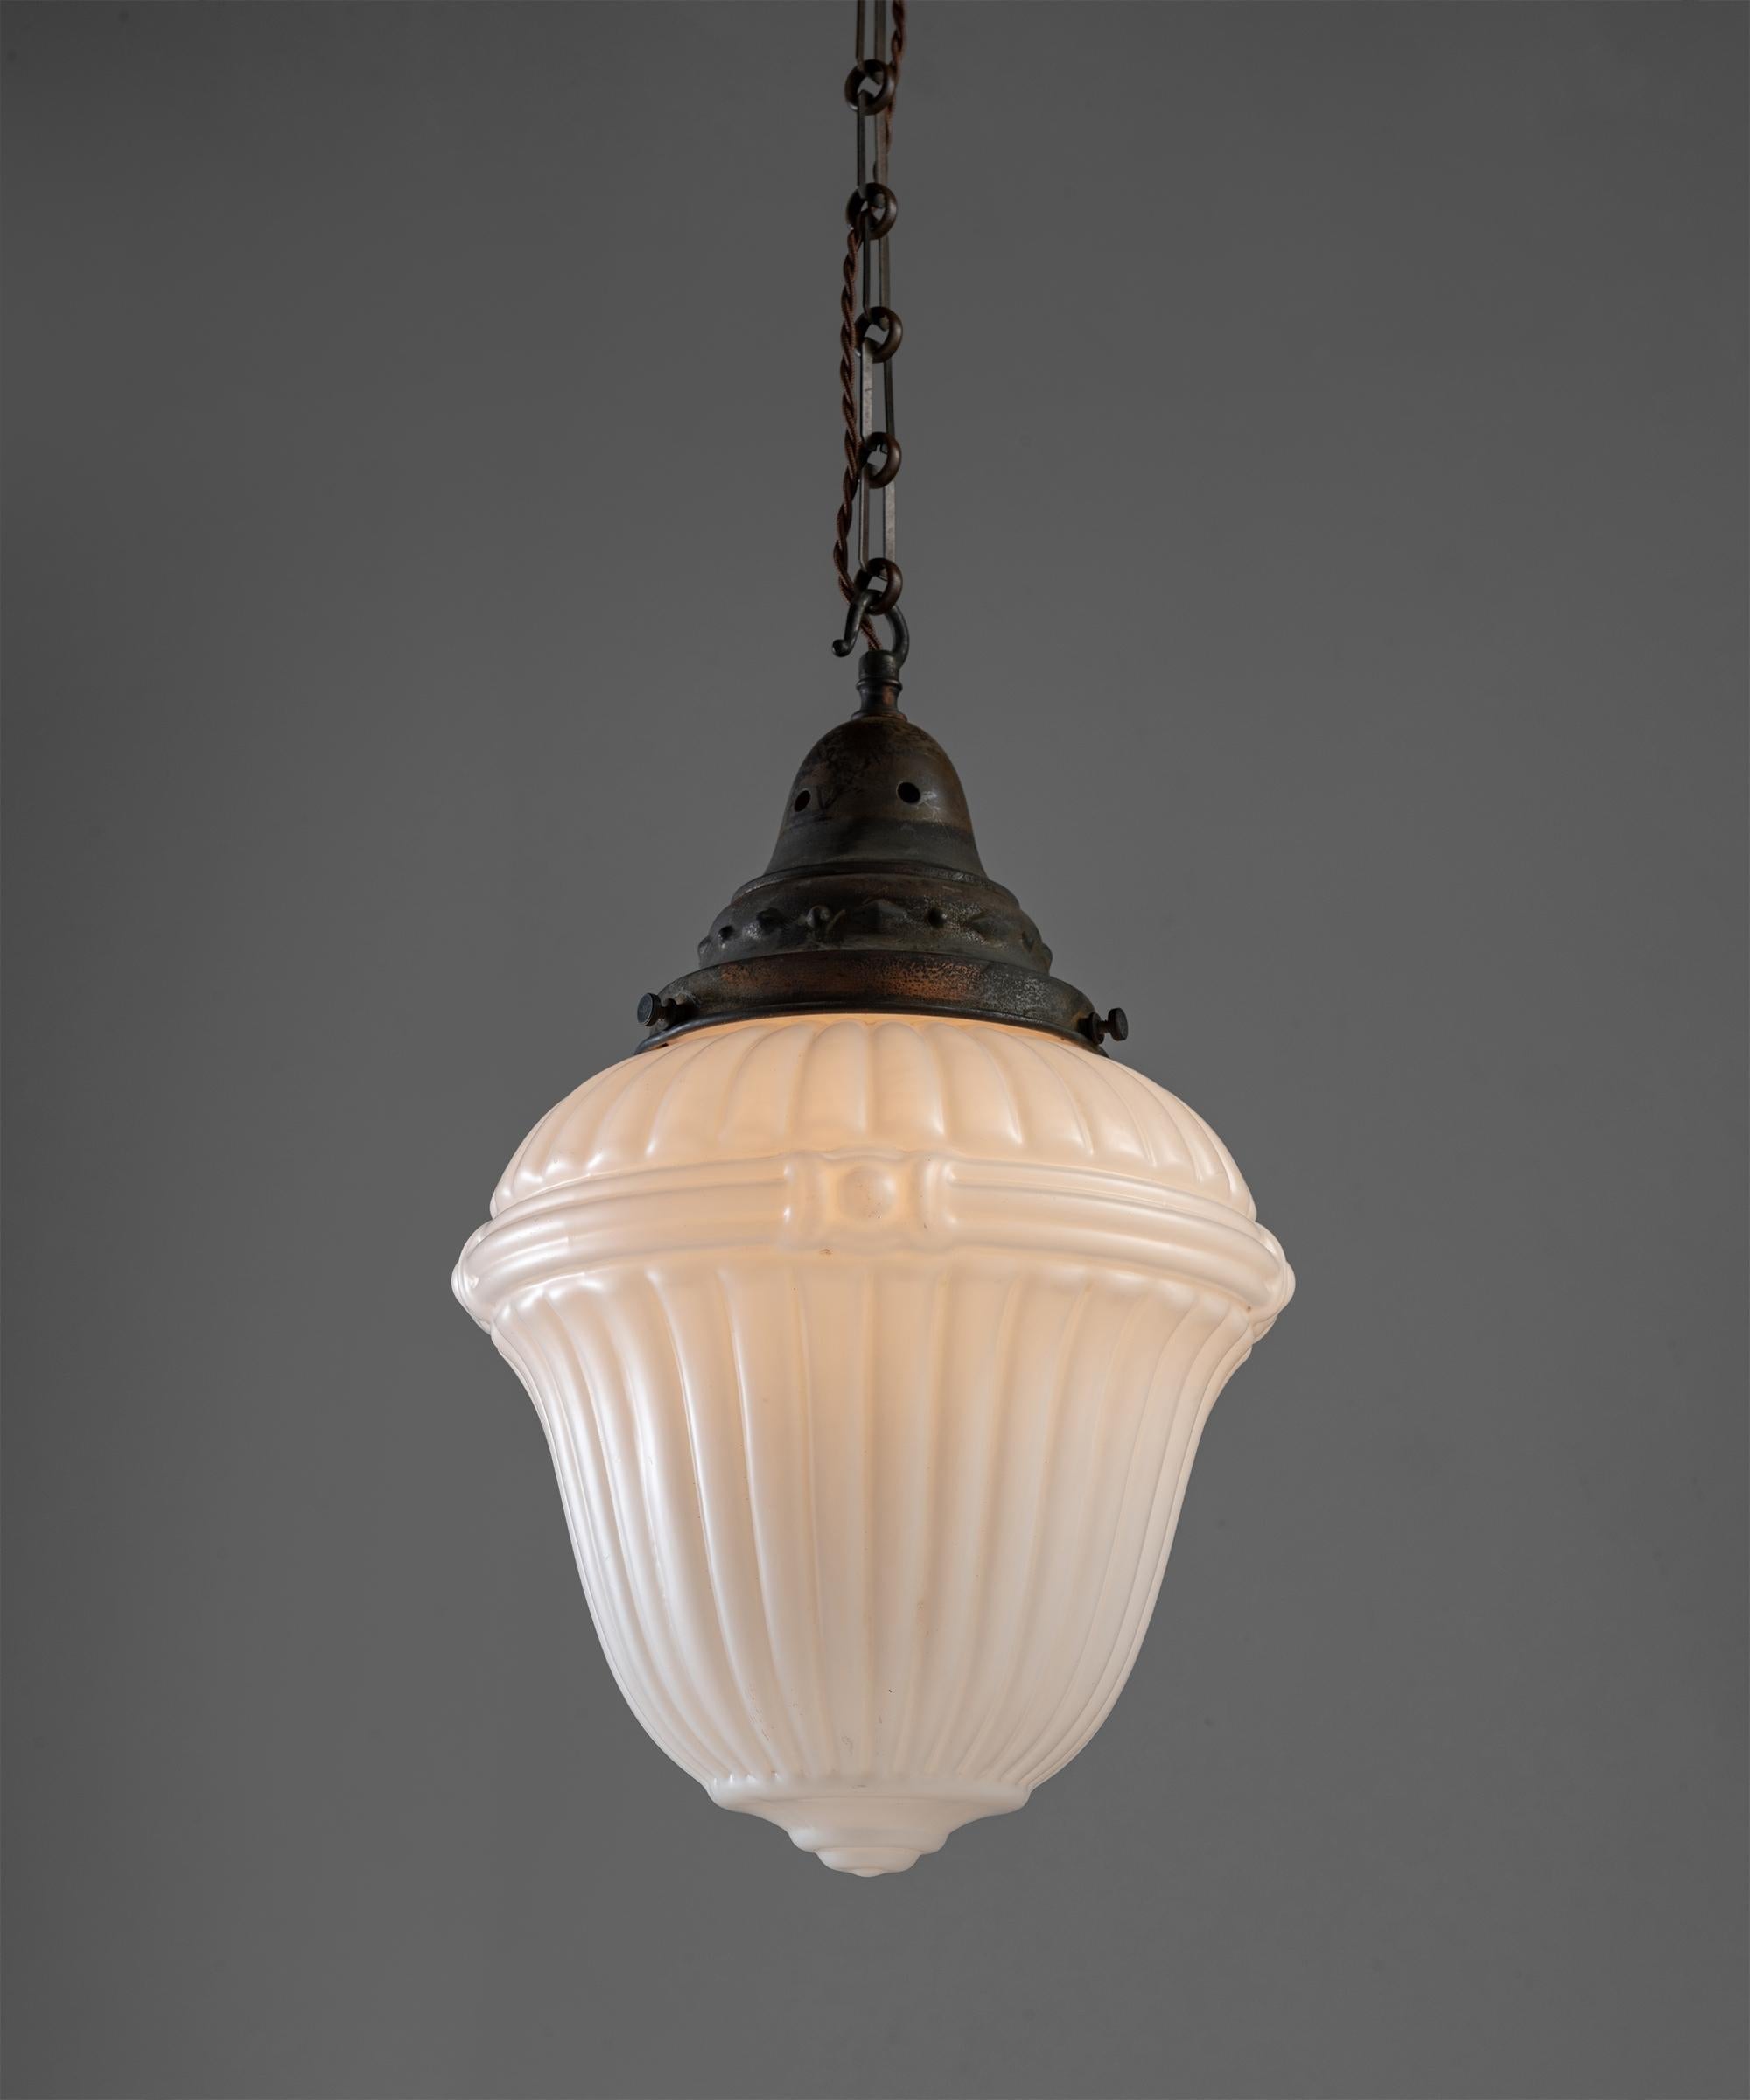 Matte opaline glass pendant, England, circa 1900

Decorative moulded opaline shade with beautifully worn fitter.